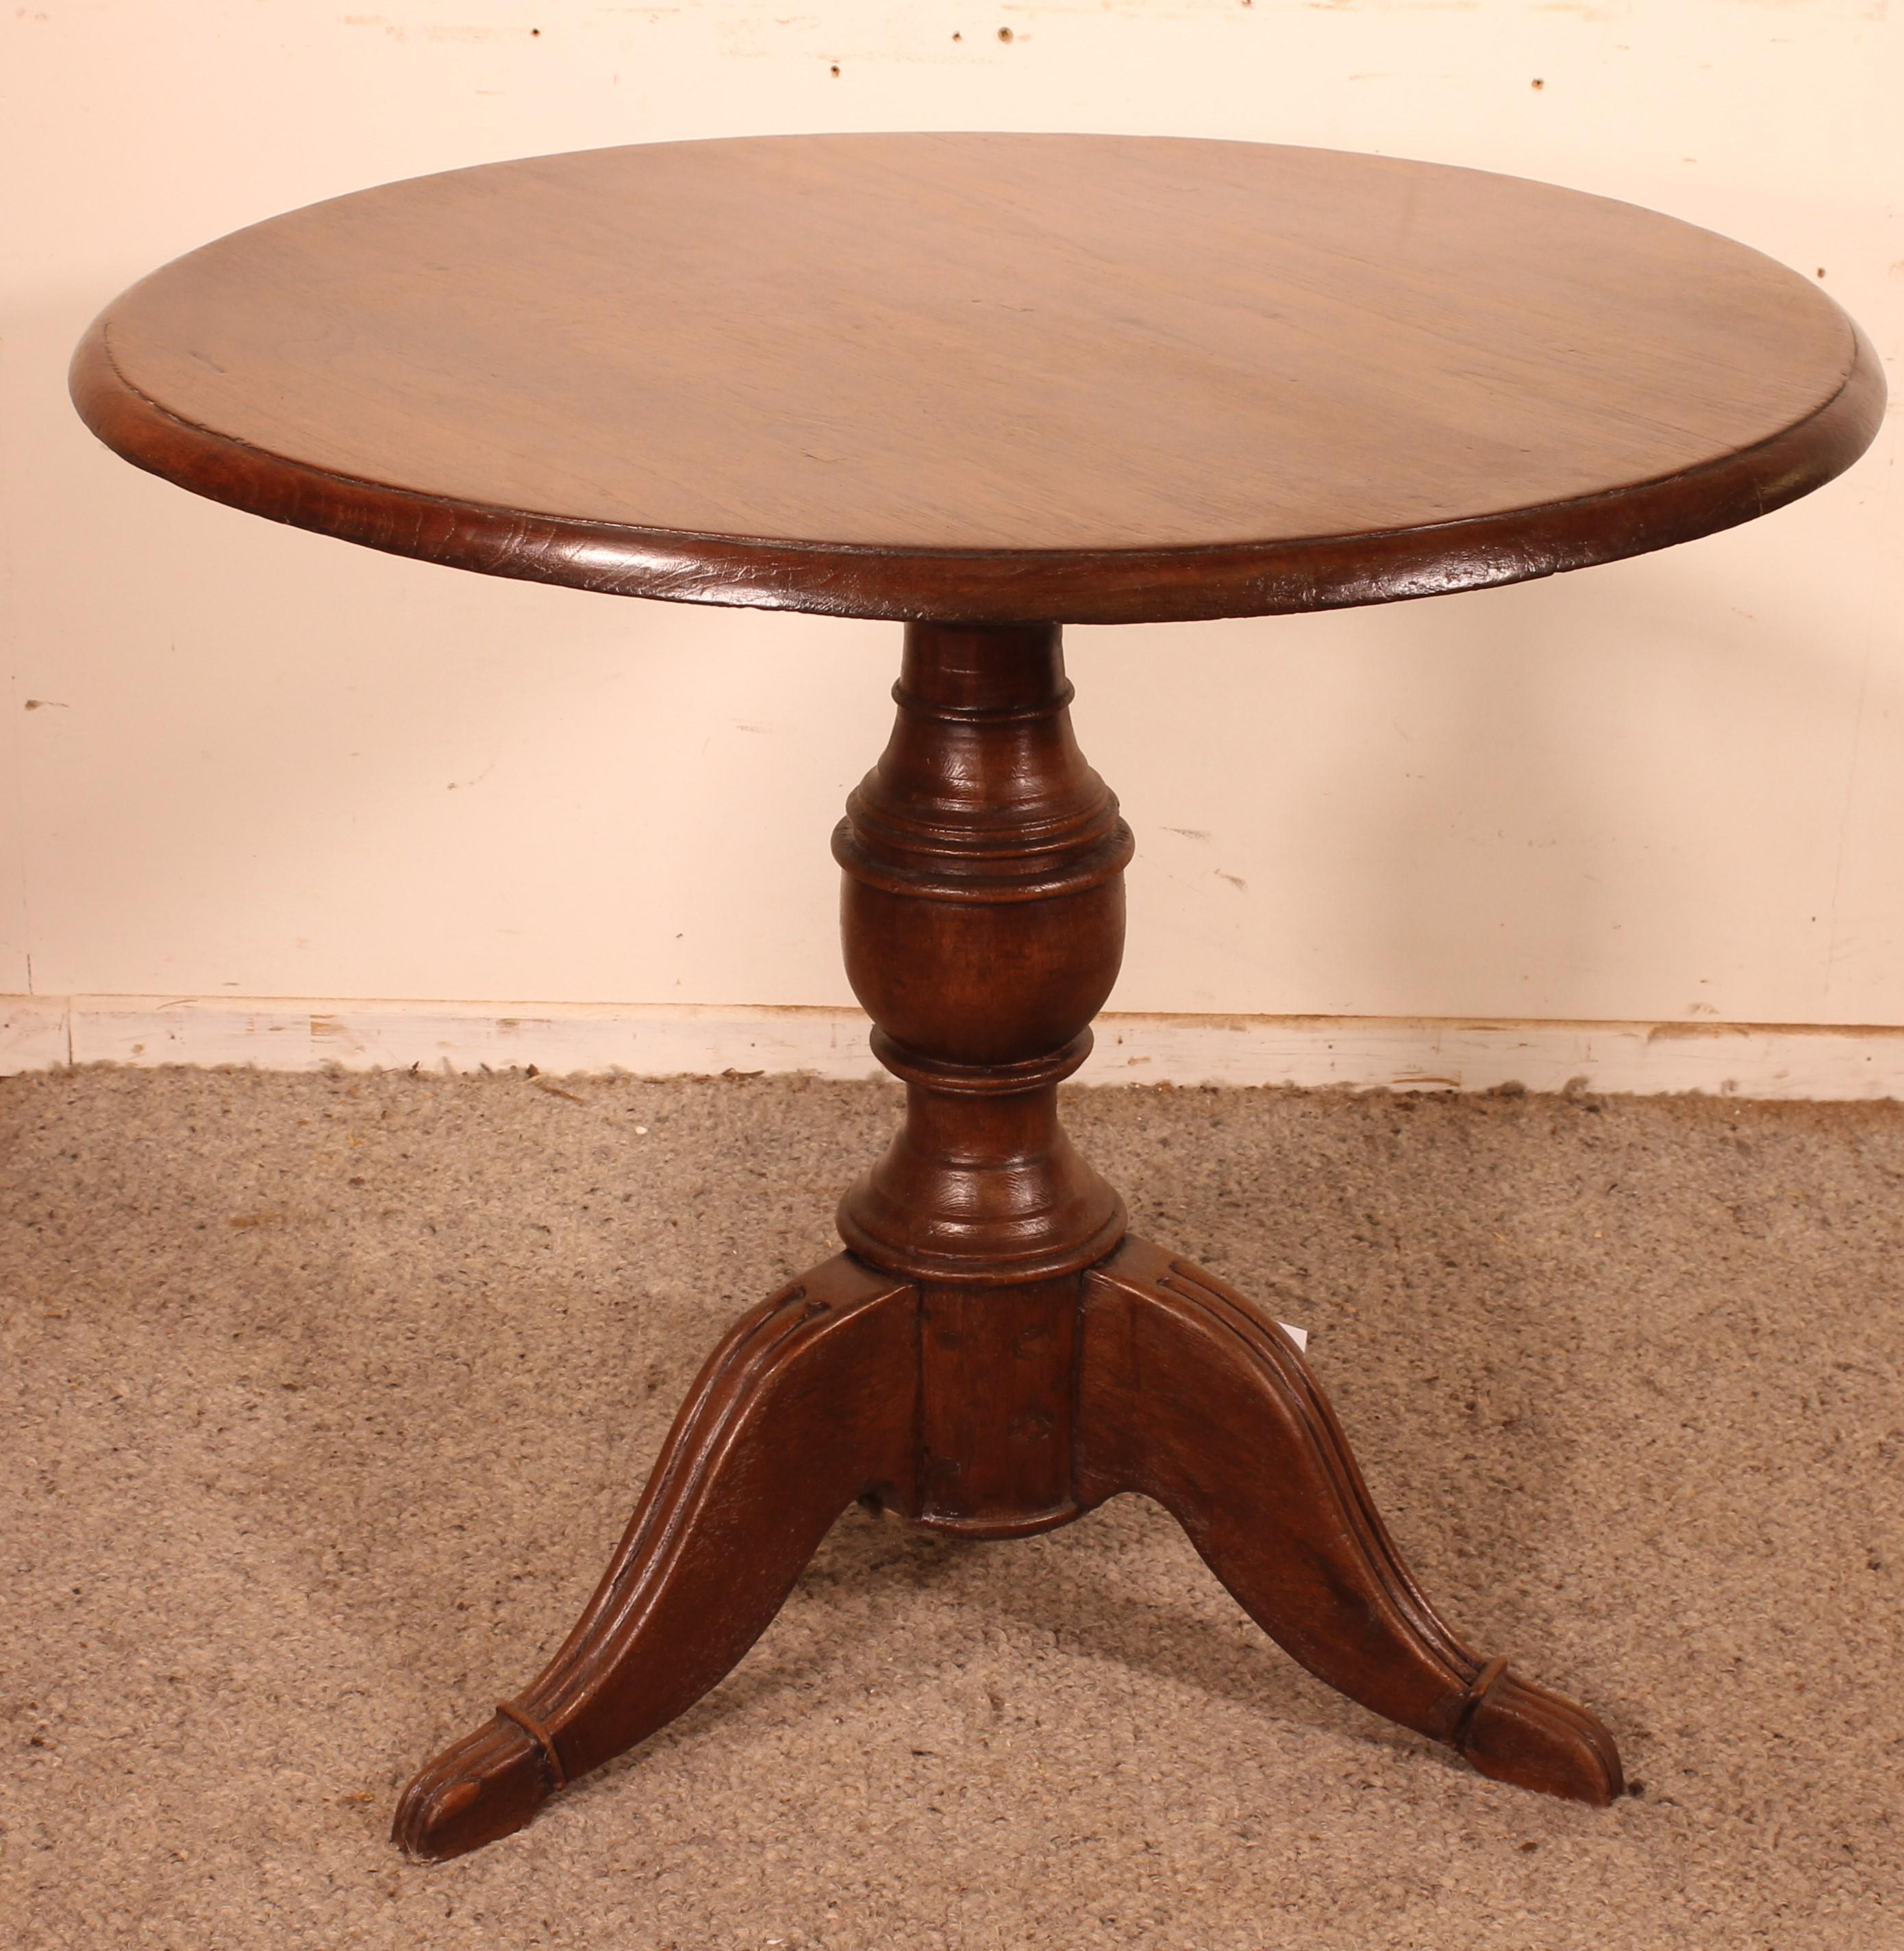 Aesthetic Movement Portuguese Pedestal Table -19th Century For Sale